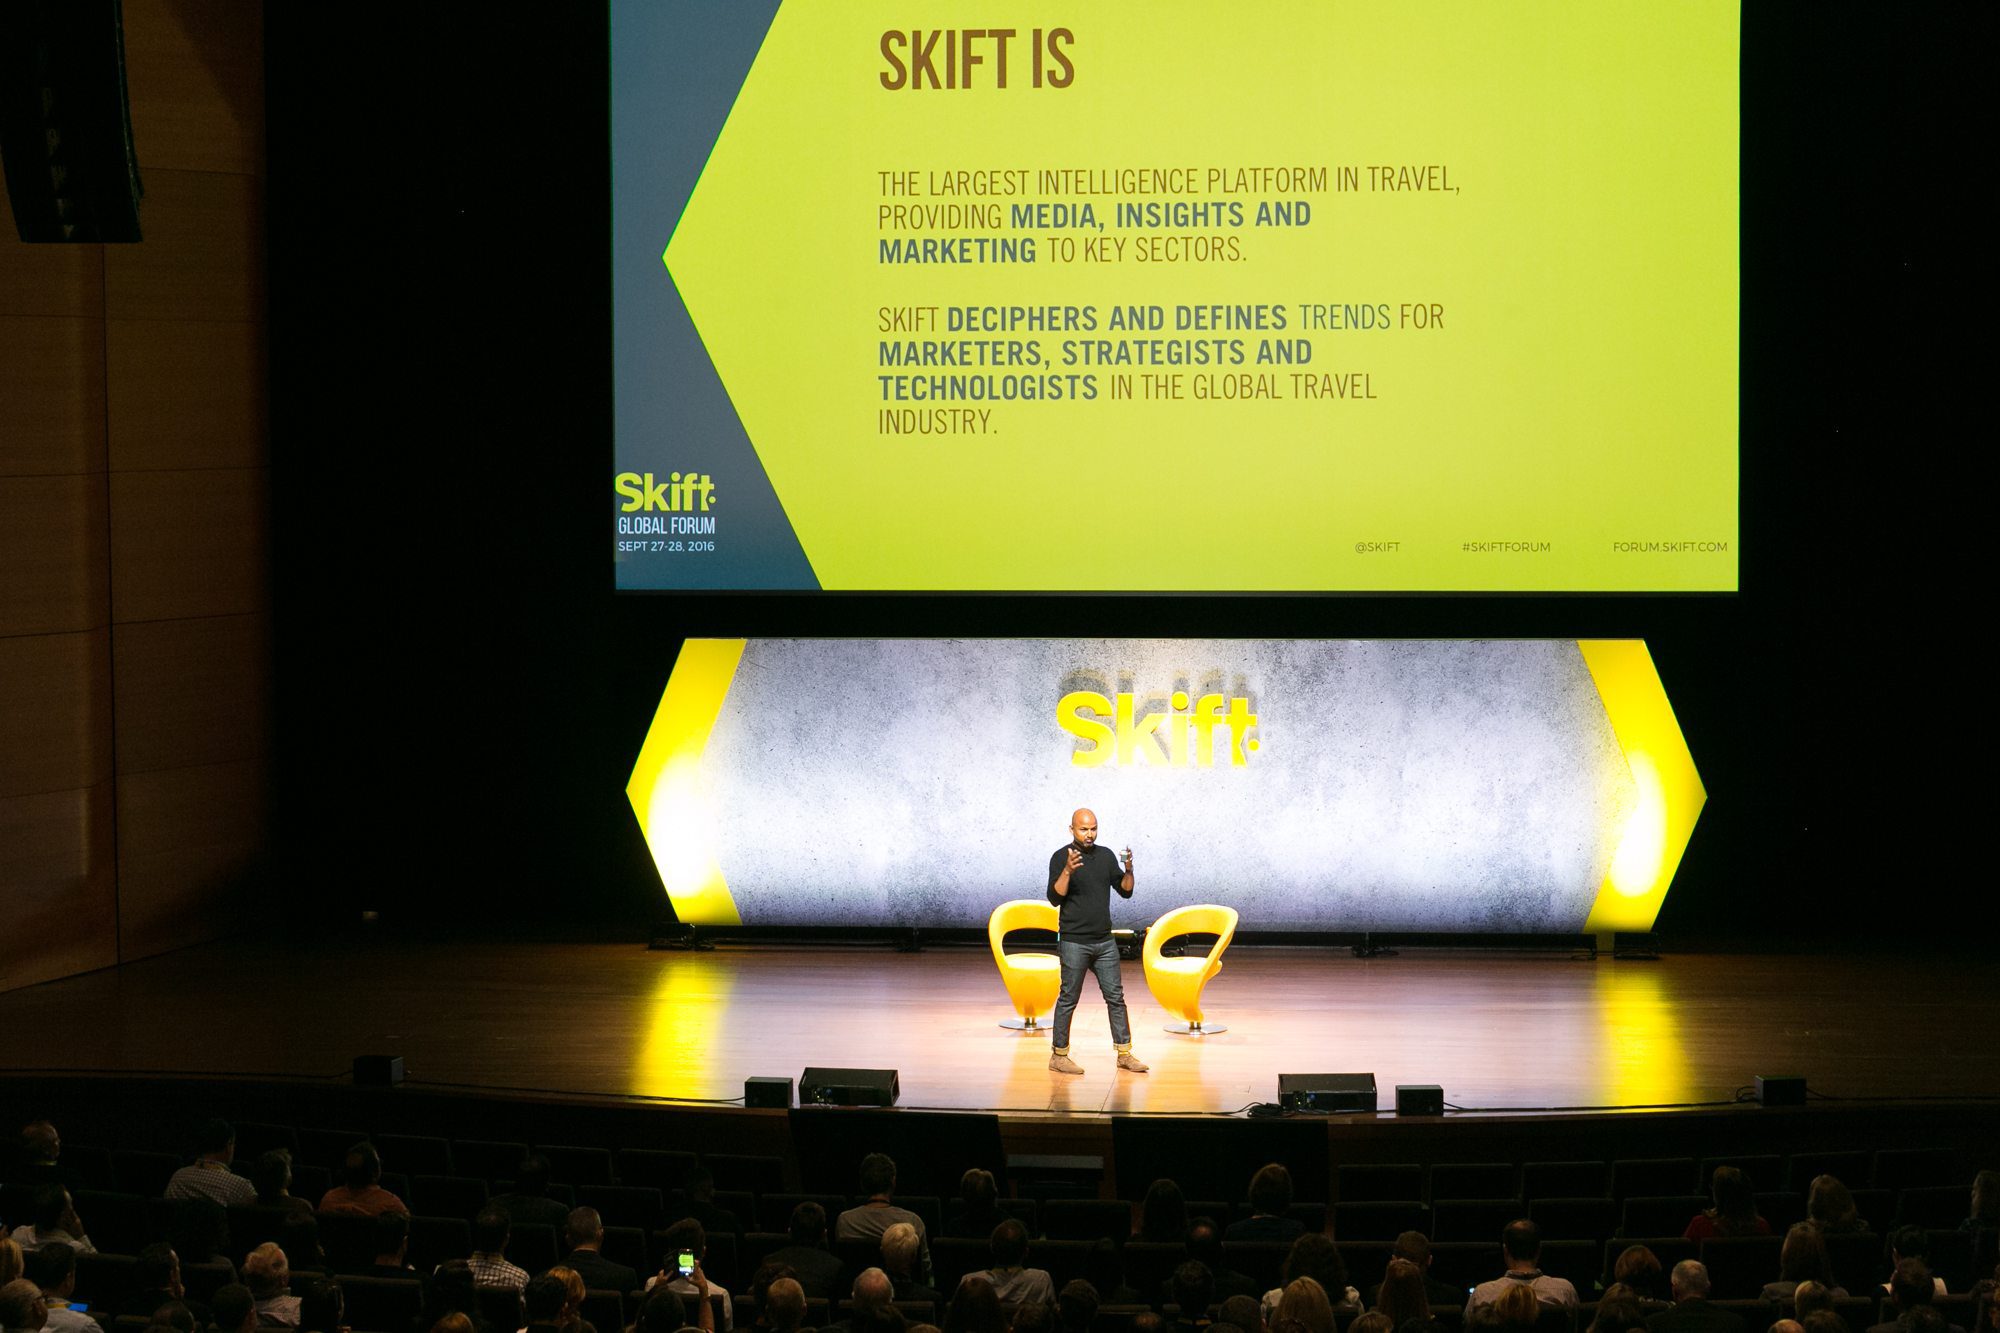 TripAdvisor co-founder and CEO Stephen Kaufer talks to Skift founder and CEO Rafat Ali and the audience at Skift Global Forum in New York, September 28, 2016.  